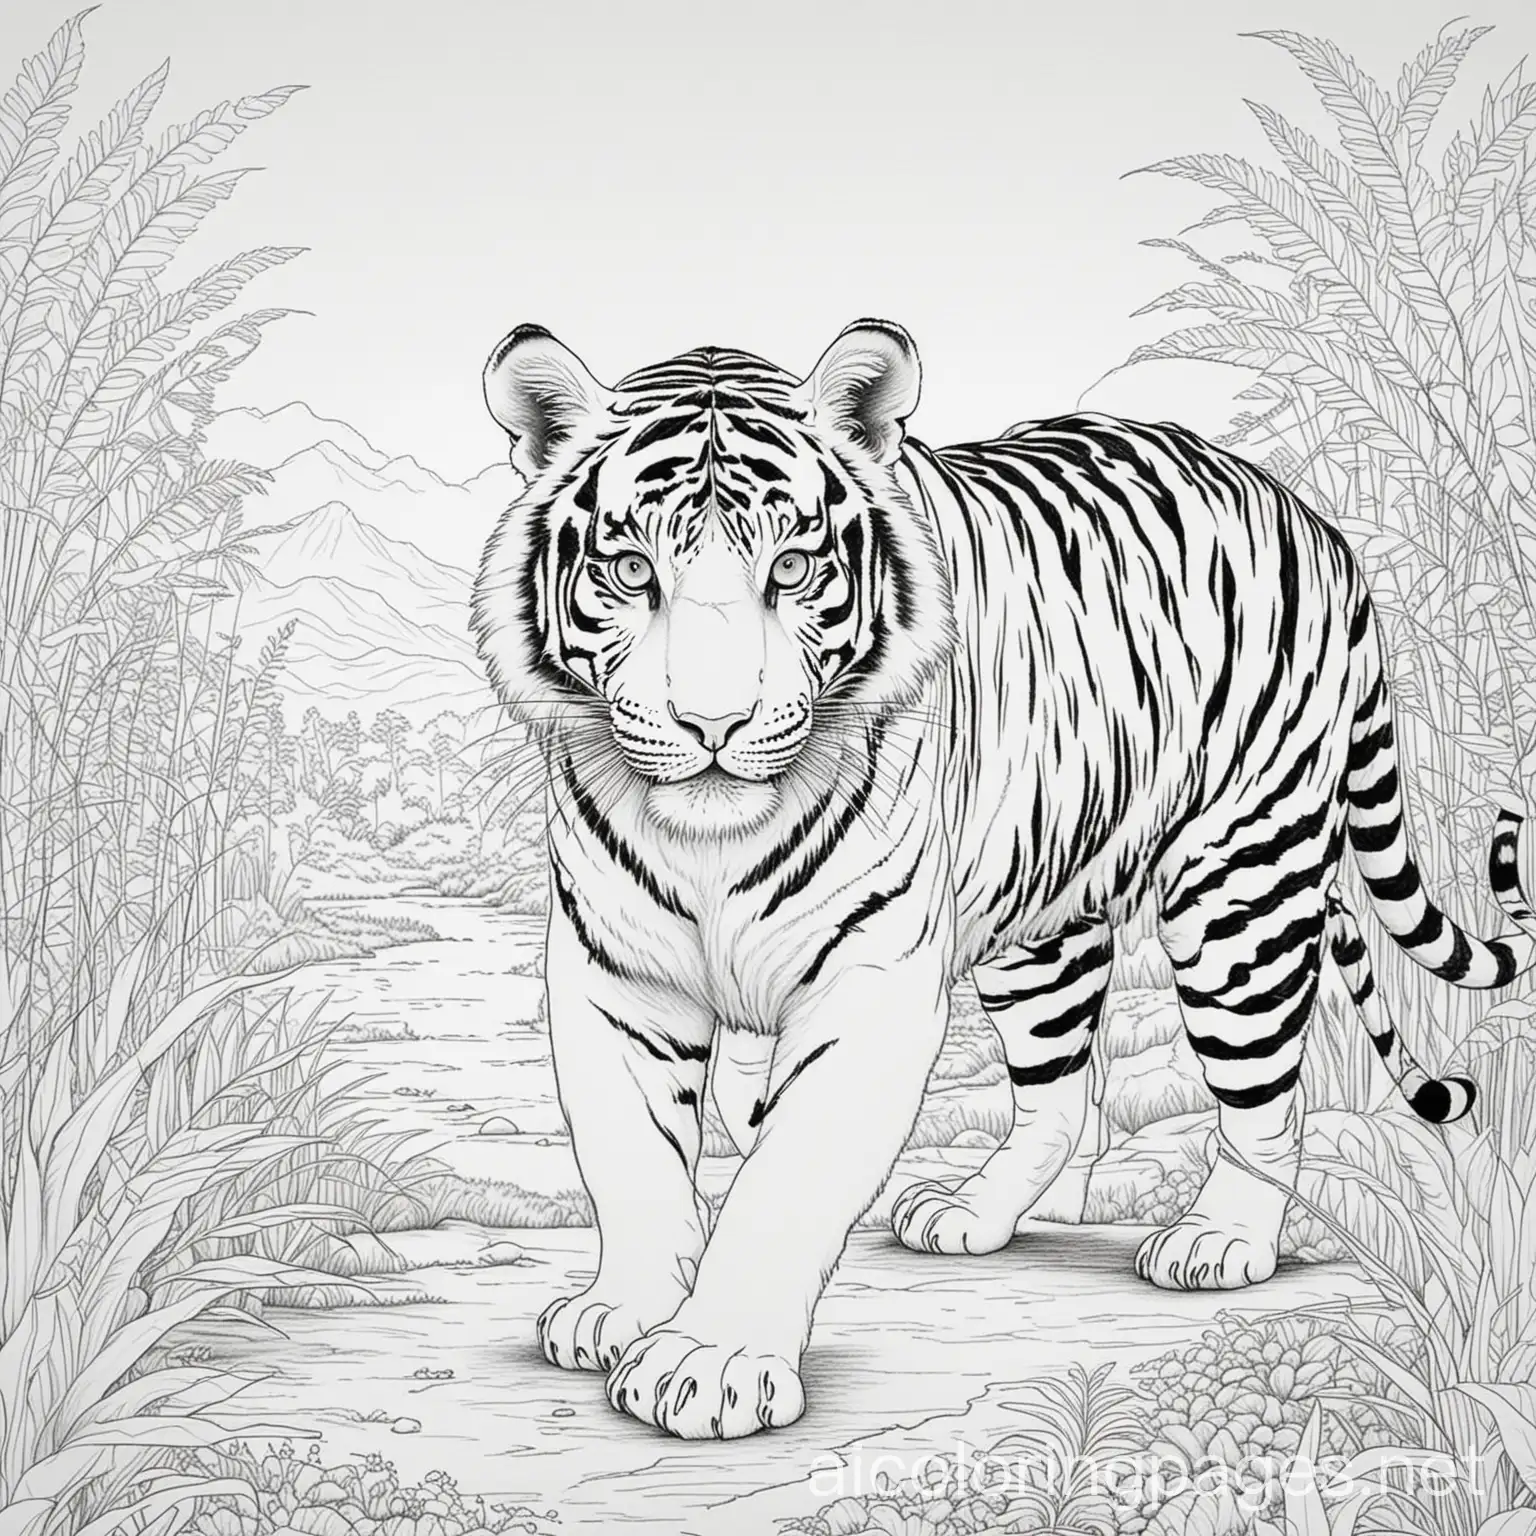 tiger in savananfor coloring page, Coloring Page, black and white, line art, white background, Simplicity, Ample White Space. The background of the coloring page is plain white to make it easy for young children to color within the lines. The outlines of all the subjects are easy to distinguish, making it simple for kids to color without too much difficulty